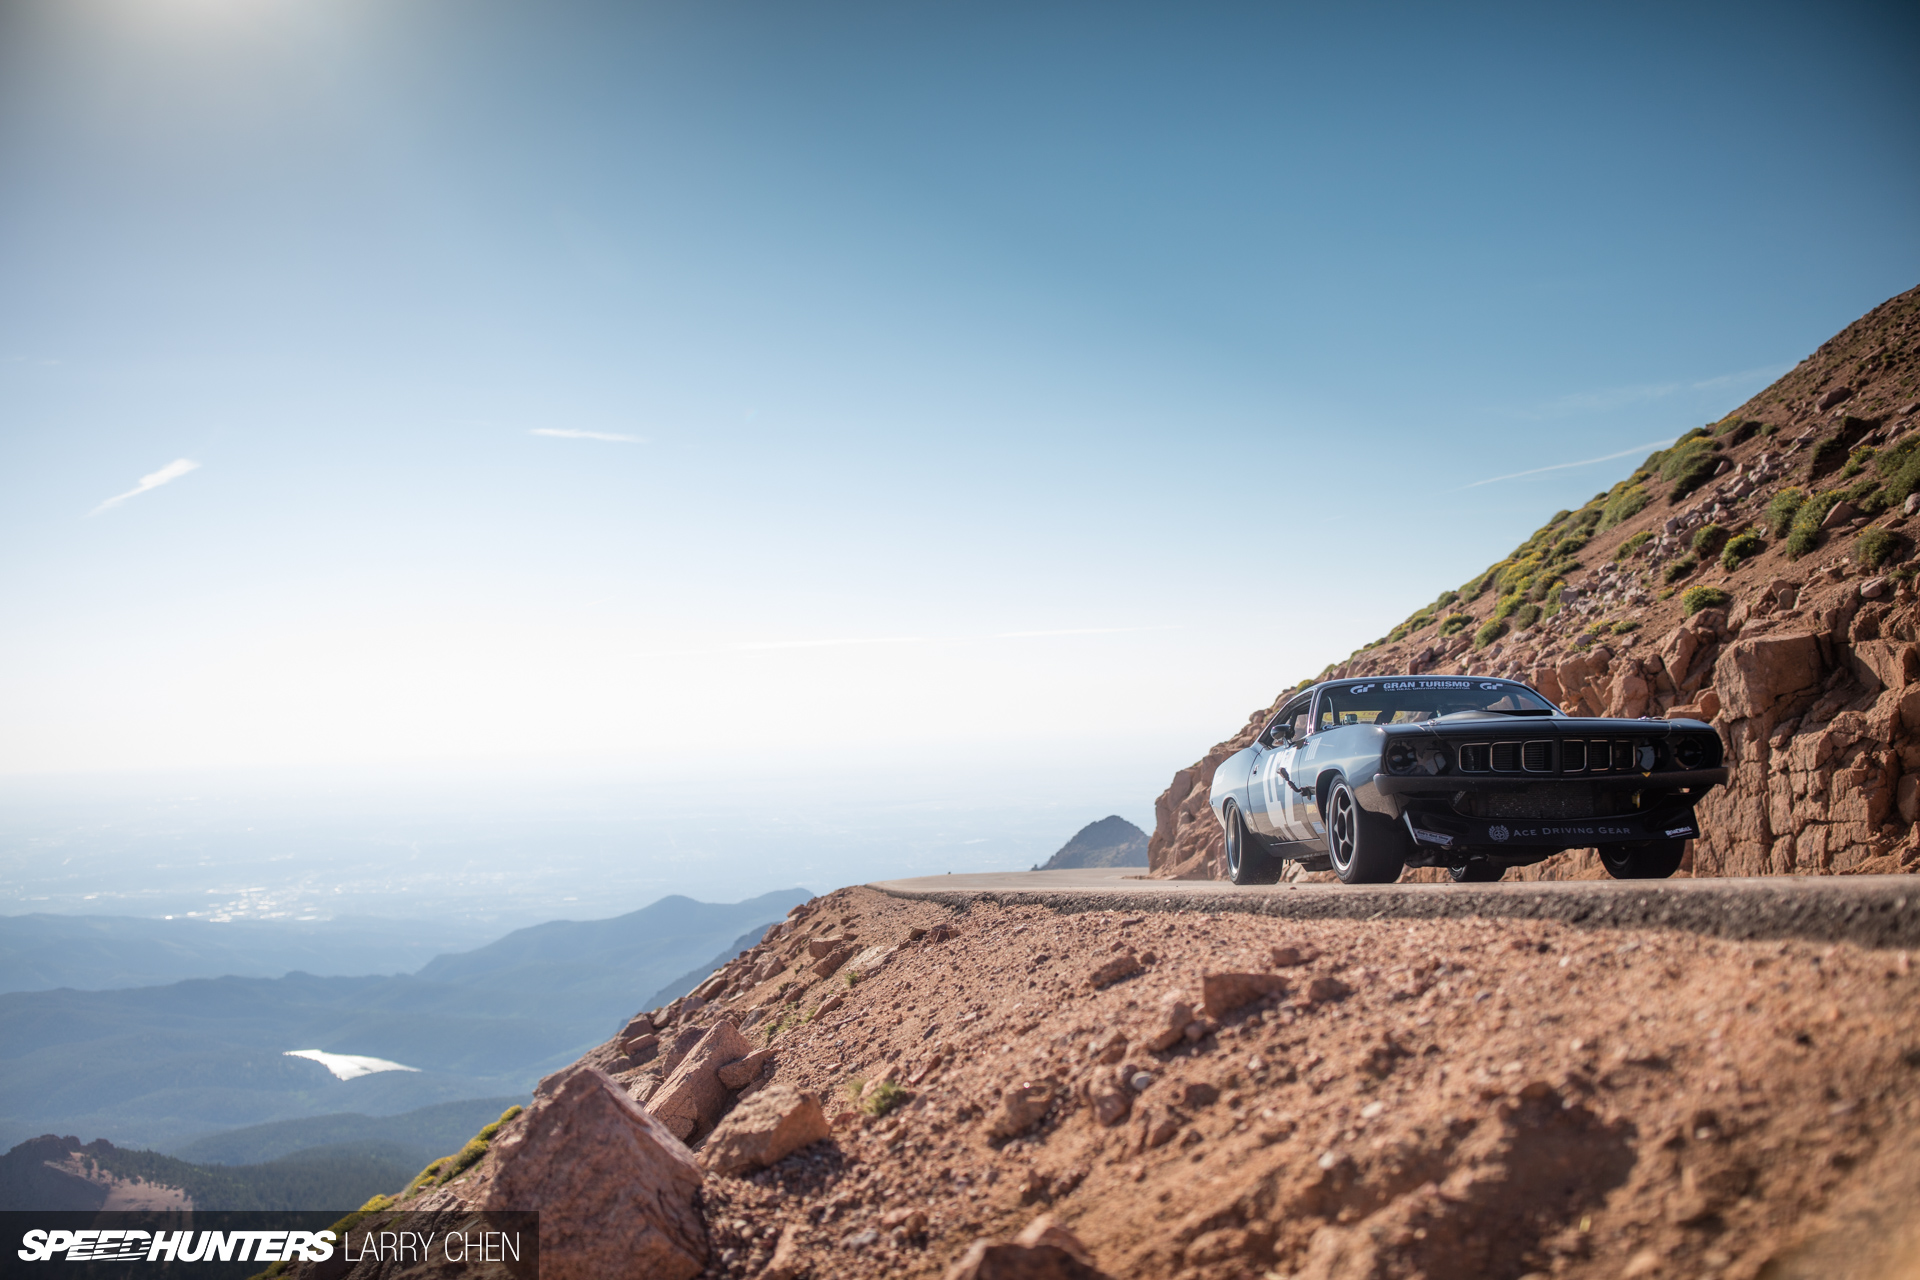 Ace Photographer Larry Chen Takes A Look Back At One Hundred Of His Favorite Photographs Of The Pikes Peak International Hill Climb For The 100th Anniversary Of The Race!